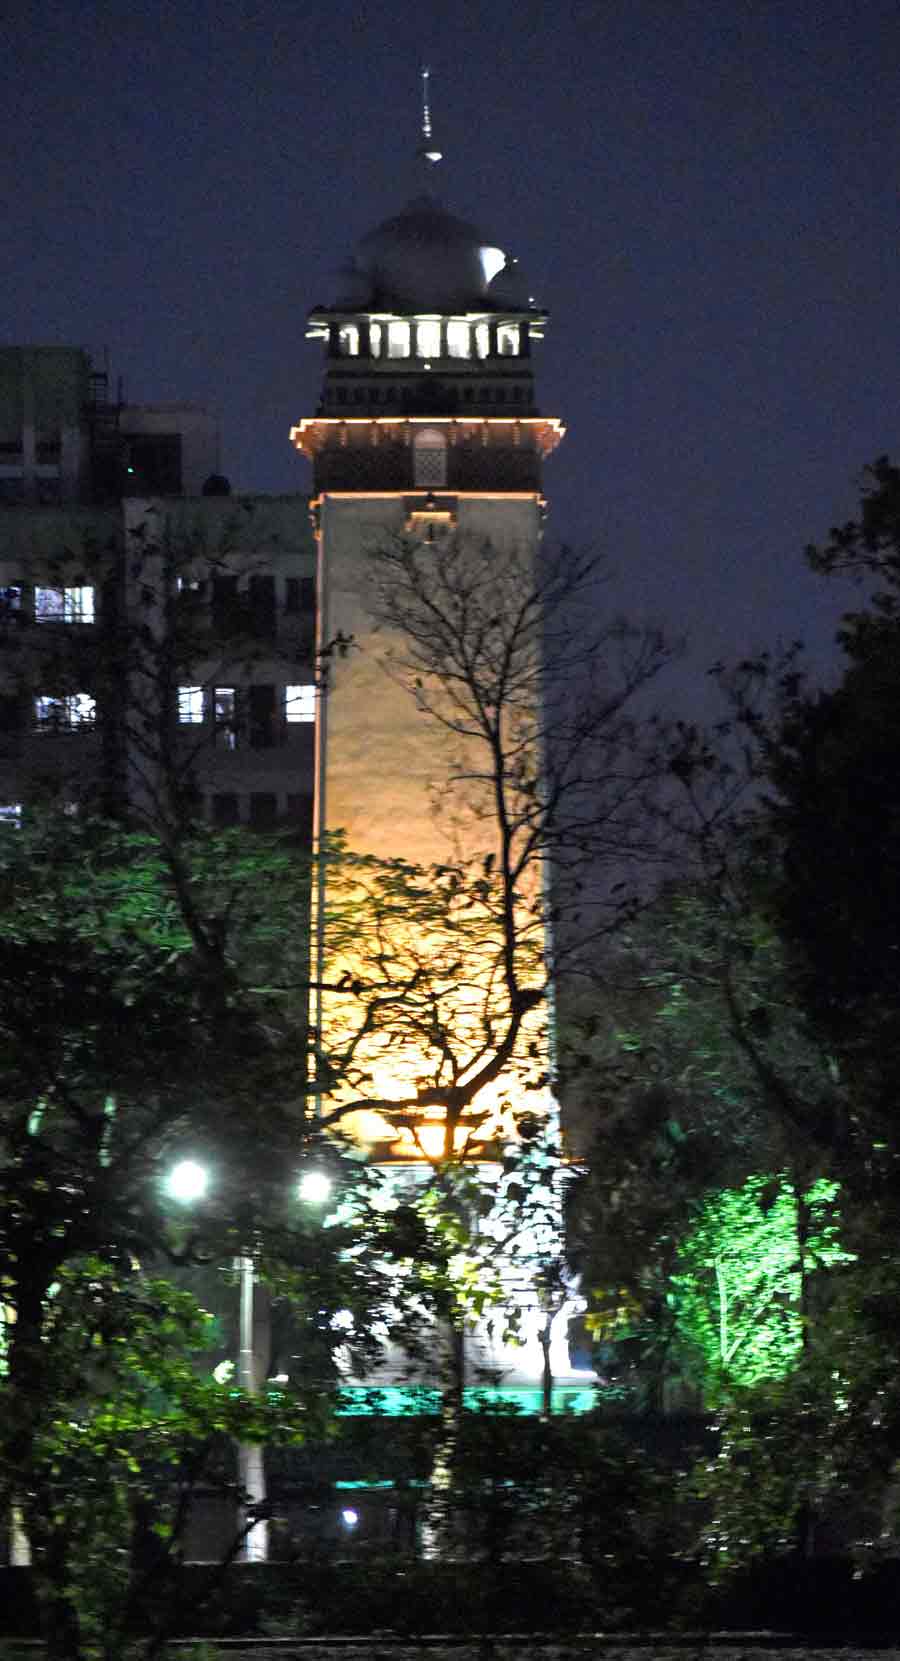 The Lascar War Memorial, the 100 feet monument on Napier Road, is one of the clearly visible structures from Hooghly. It was built by shipping and mercantile companies in memory of the 896 Lascars (sailors and soldiers) of undivided Bengal and Assam who lost their lives during World War I